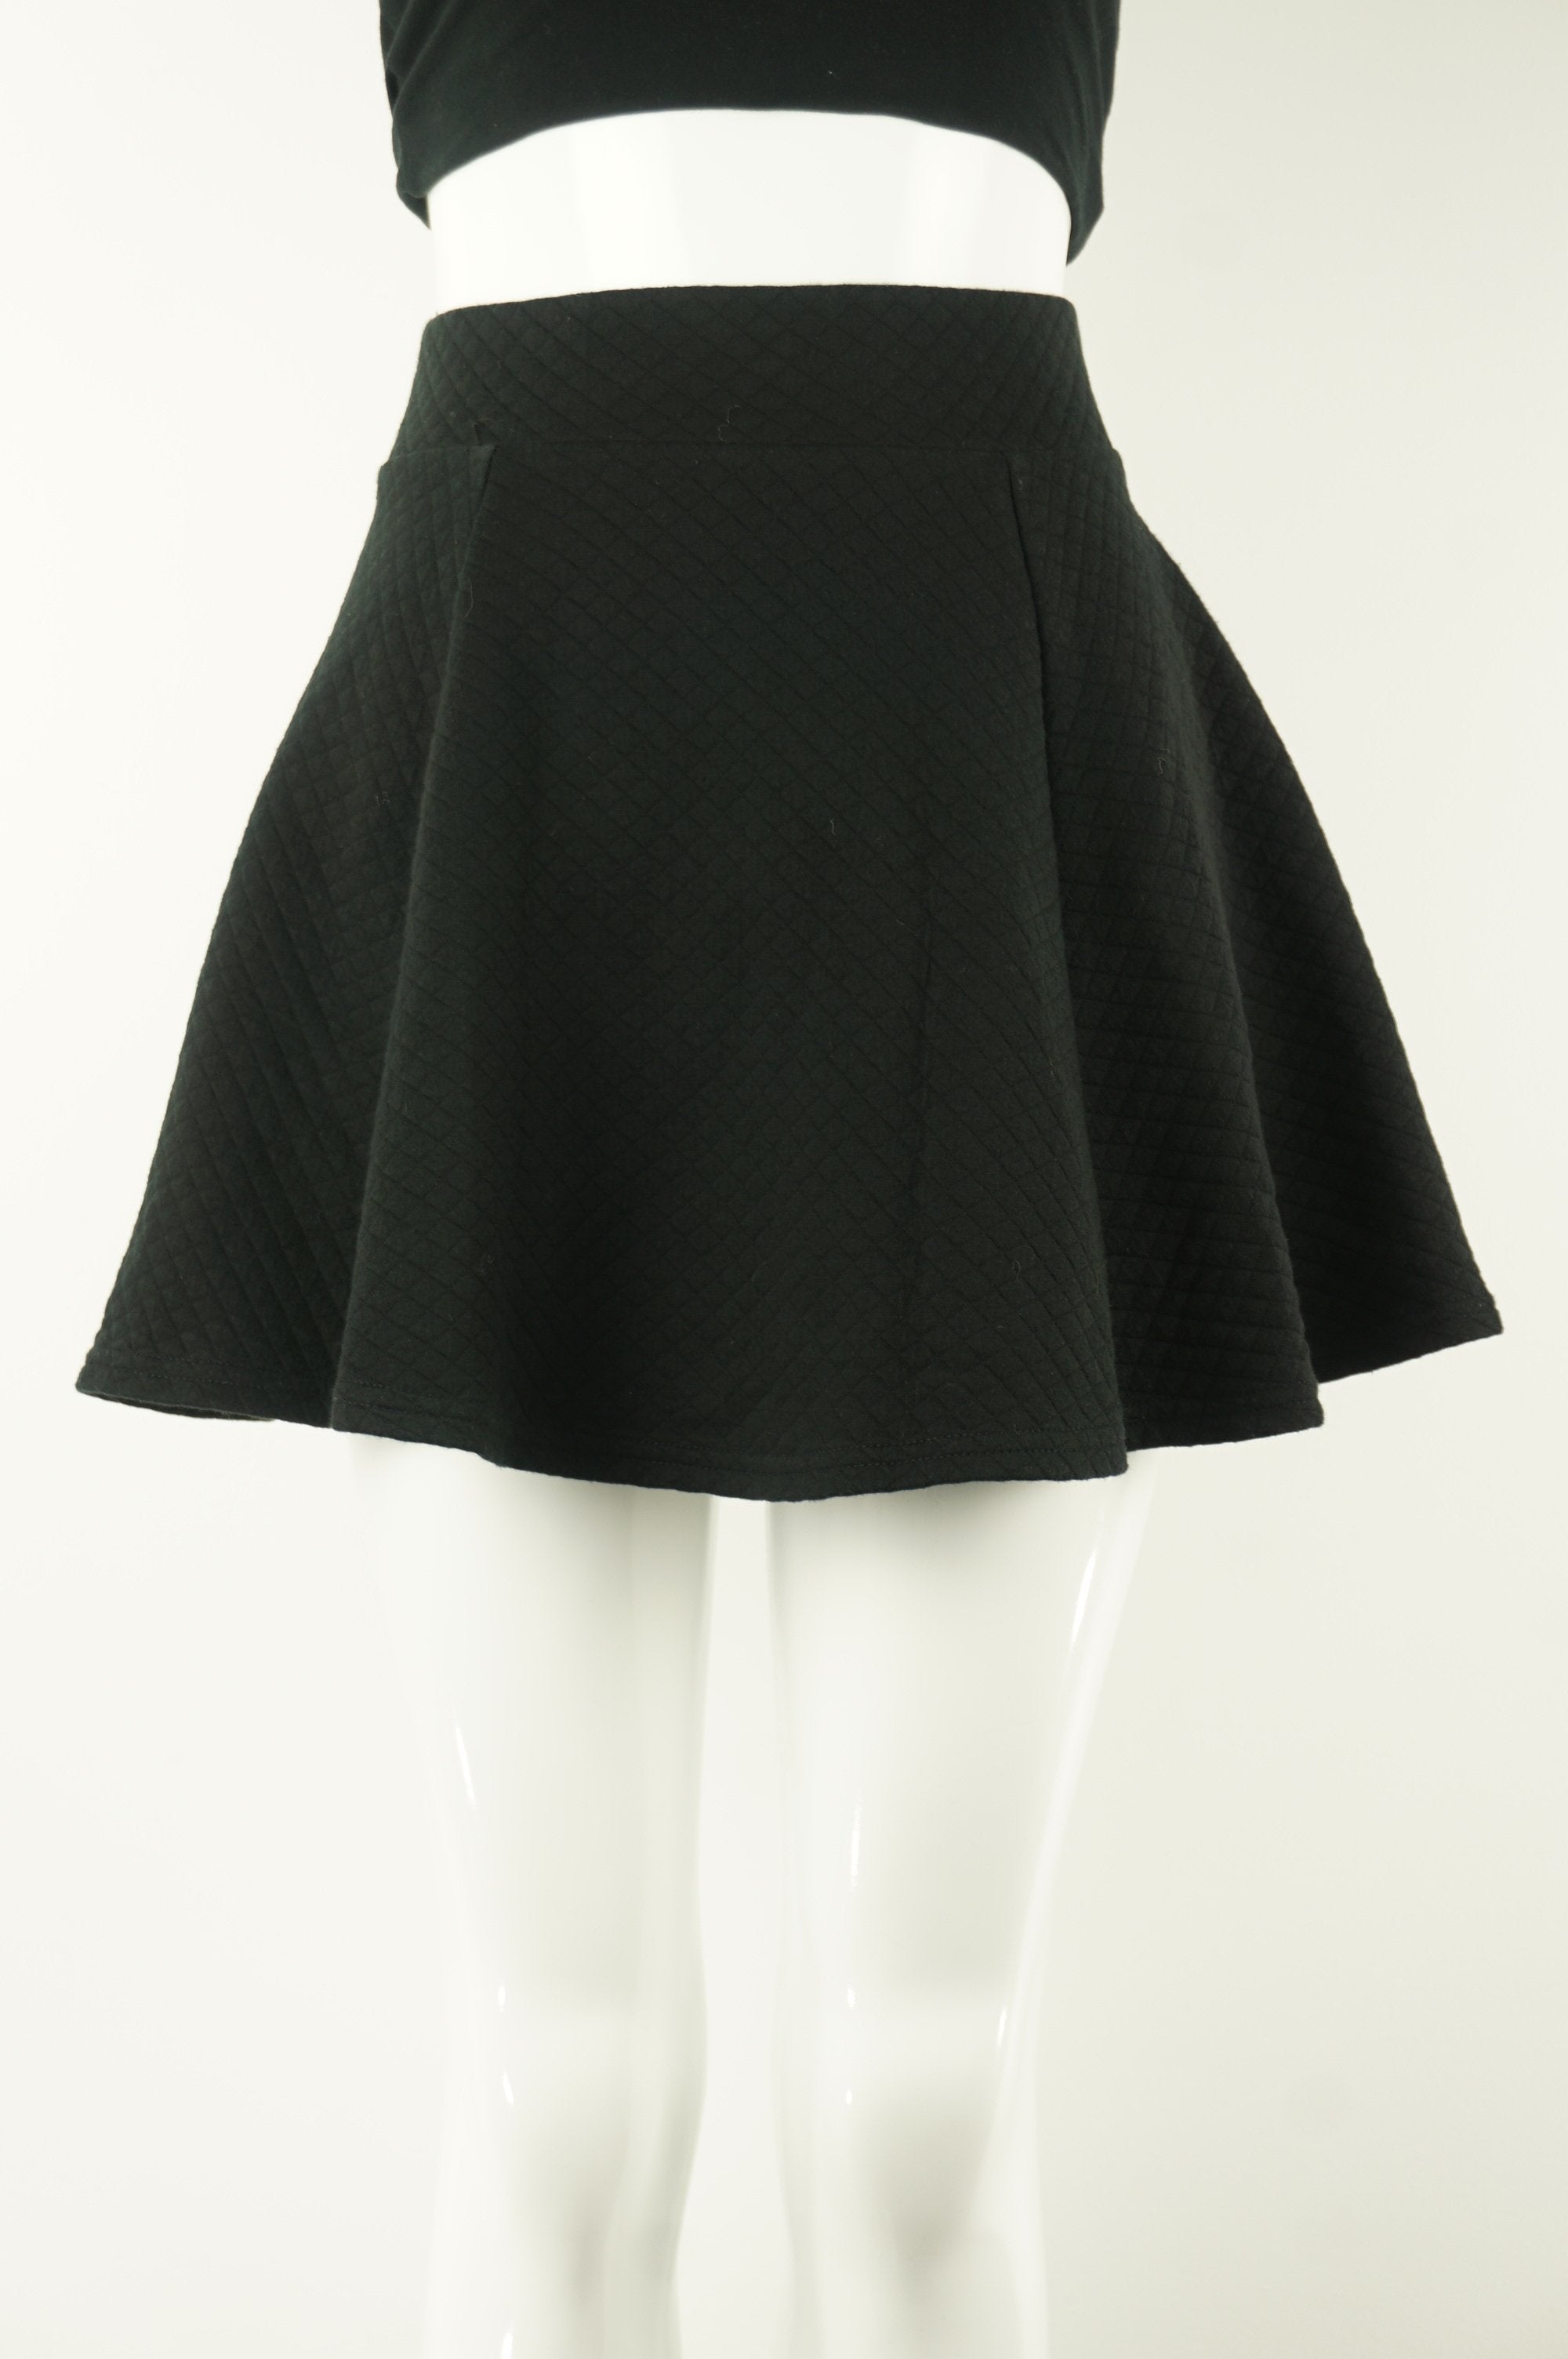 H&M Quilted Skirt, Thicker quilted skirt with zipper in the back. , Black, Cotton and Elastane, women's Skirts & Shorts, women's Black Skirts & Shorts, H&M women's Skirts & Shorts, women's quilted mini skirt, women's black short skirt